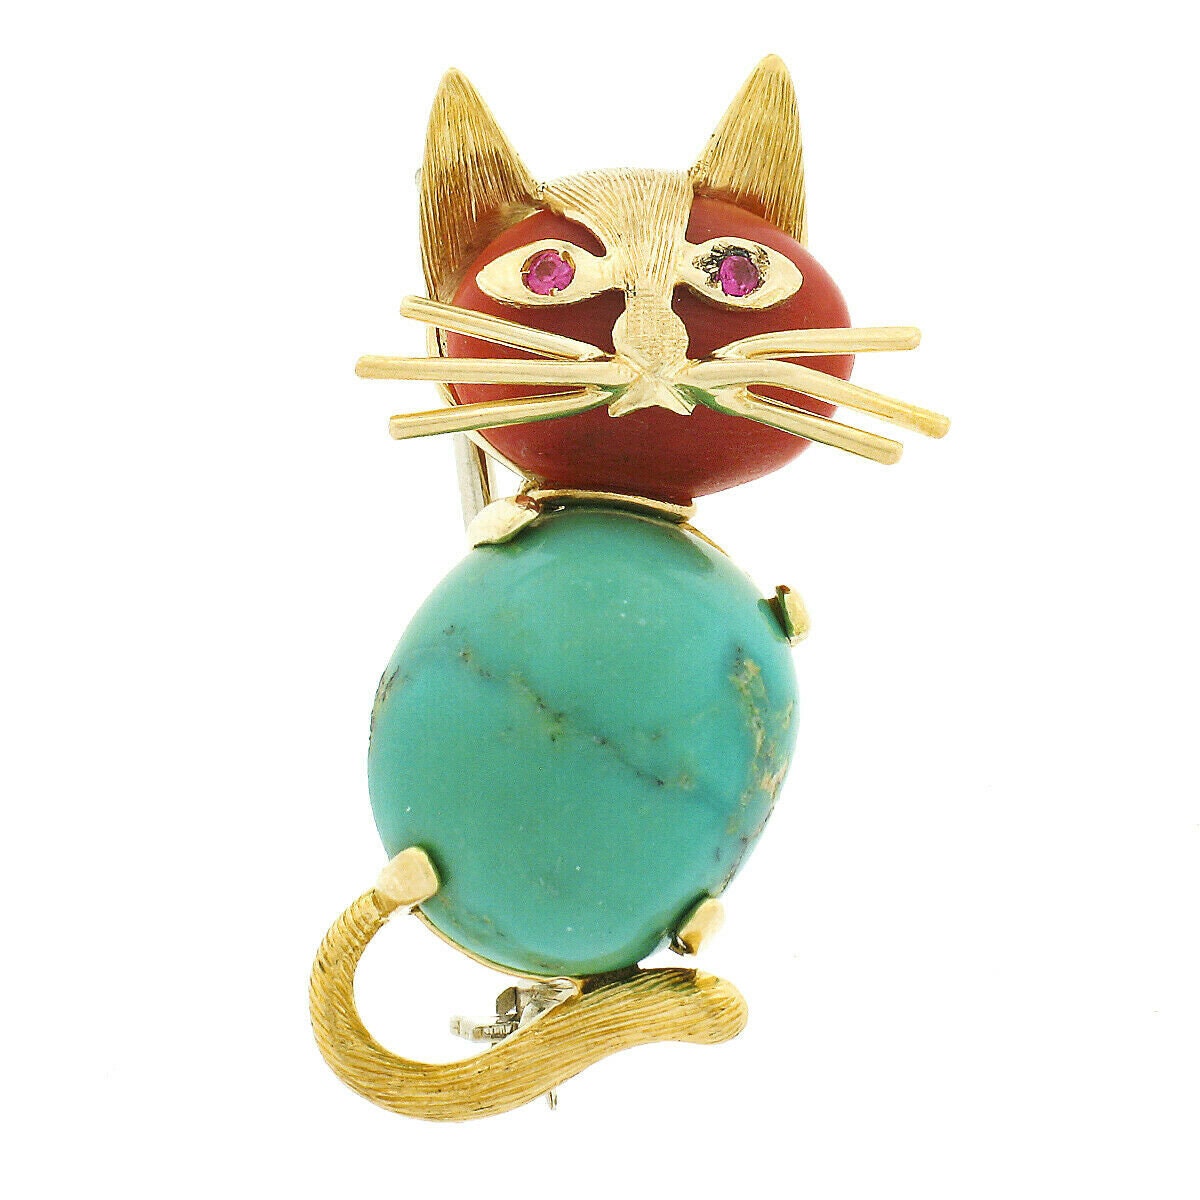 Vintage 18k gold Cat Brooch pin with Cats eyes and Ruby